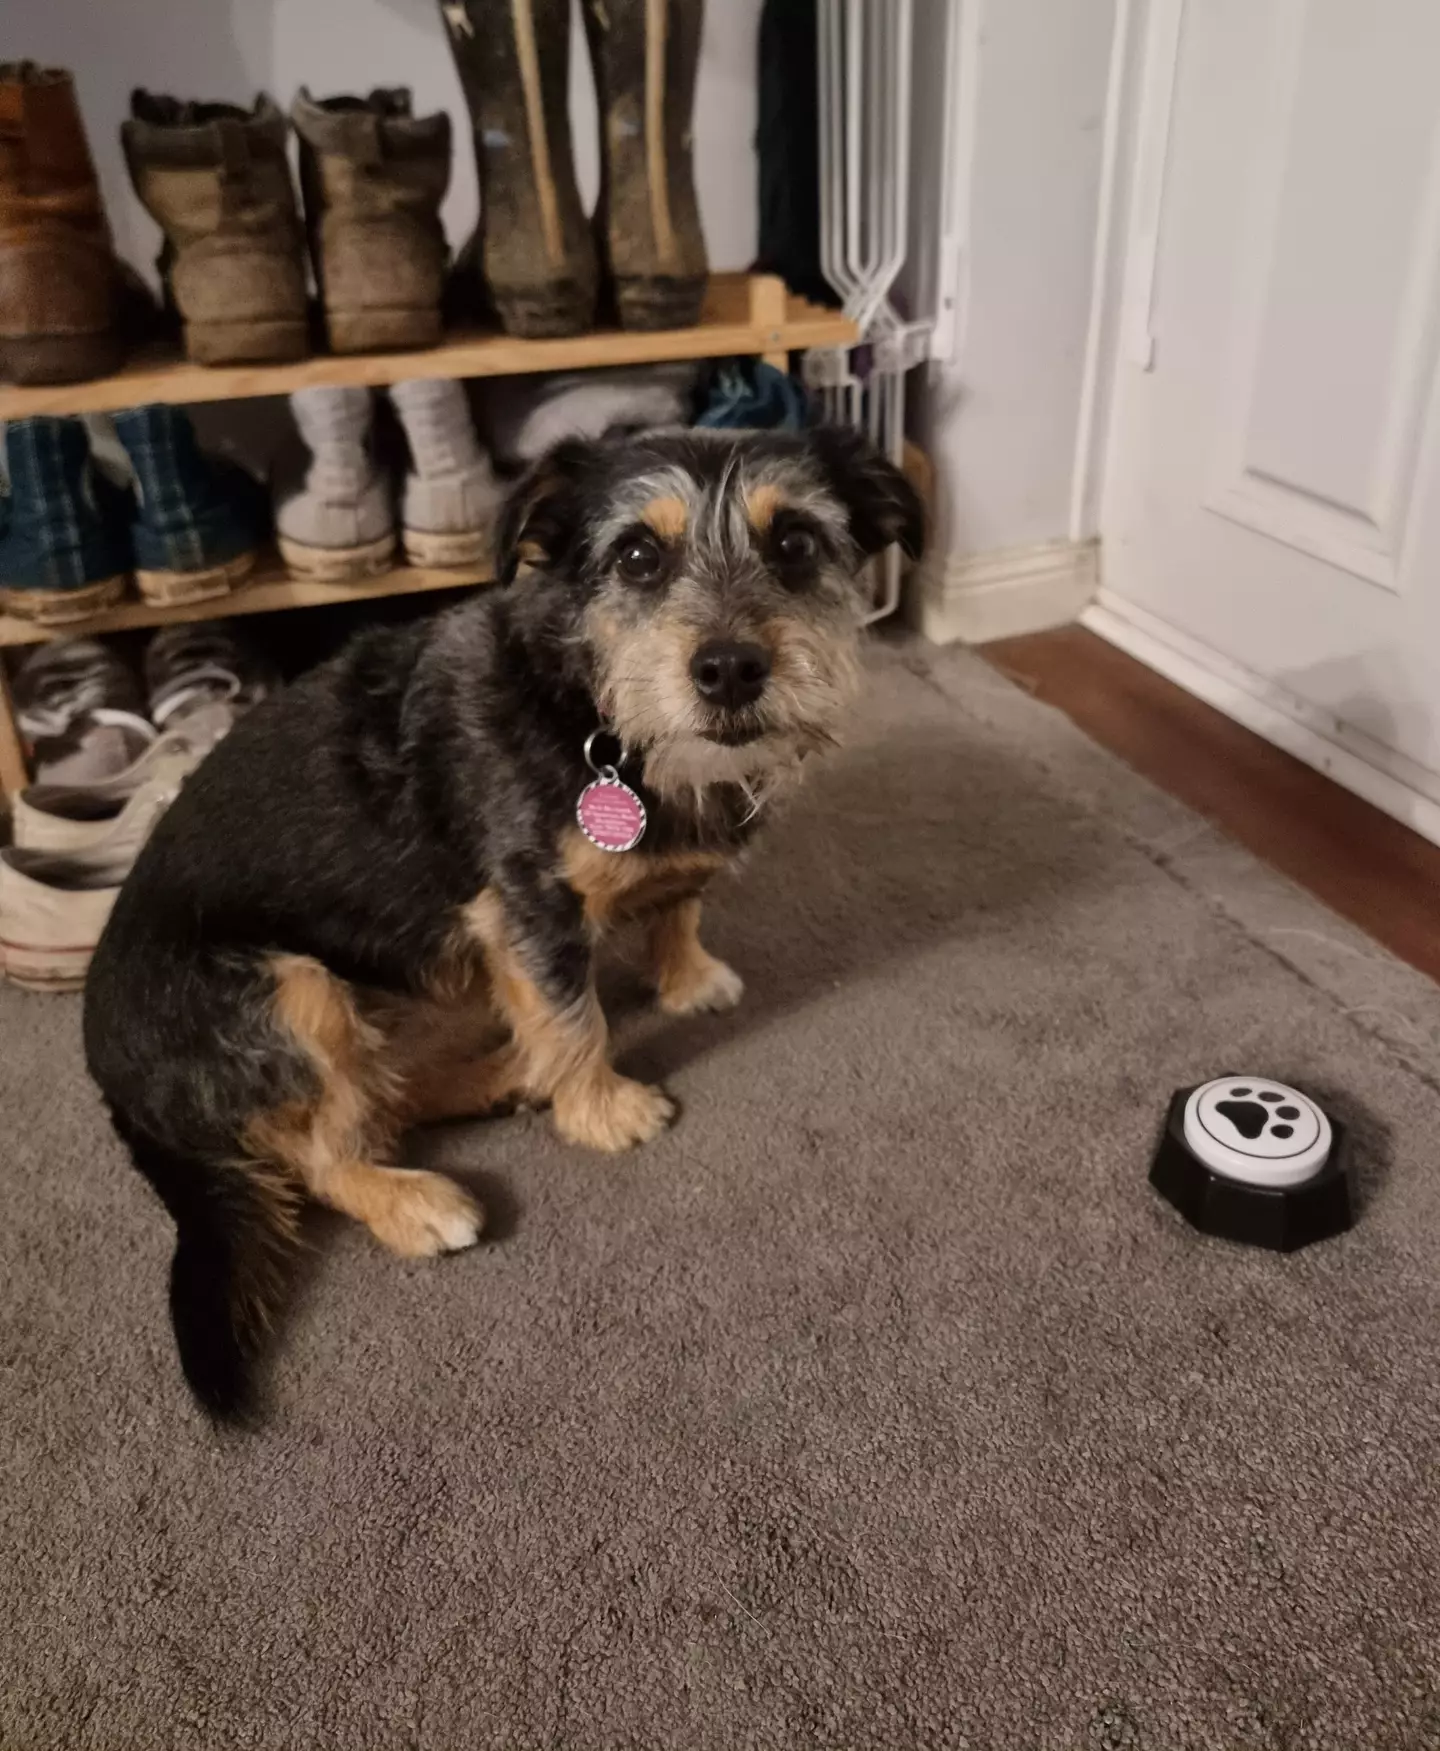 Paisley slowly began to make use of the buzzers for communicating her wants and needs.